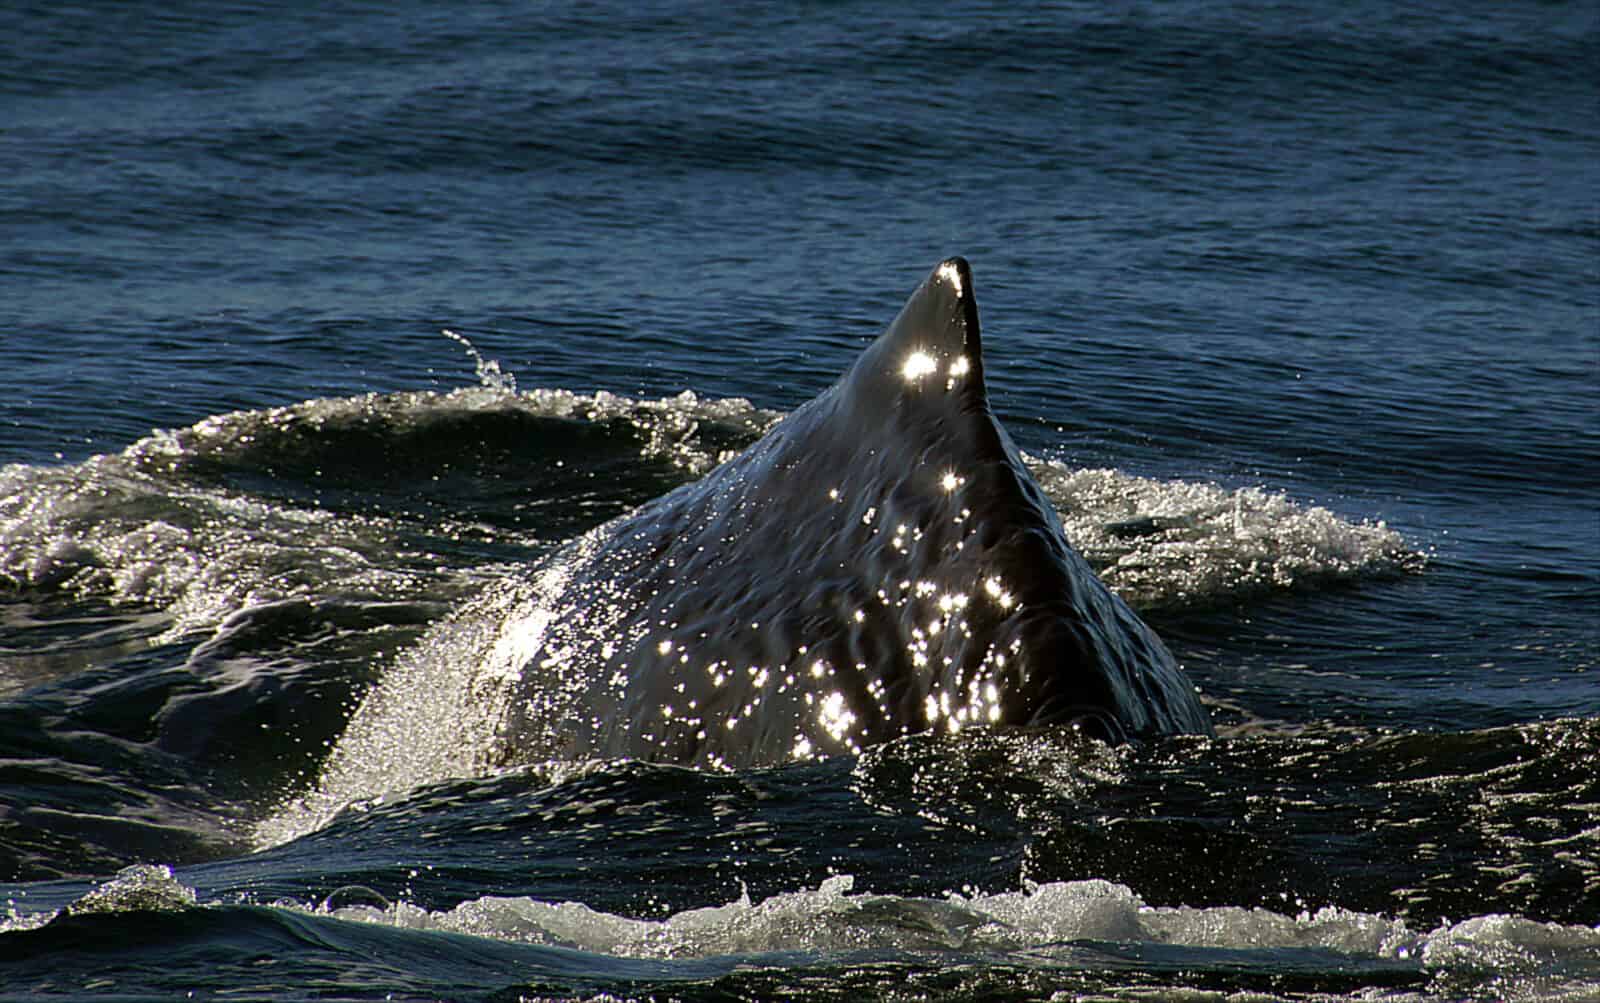 A sperm whale's back and dorsal fin gleam in the sun as the whale dives. Public domain photo by Bernard Spragg of New Zealand